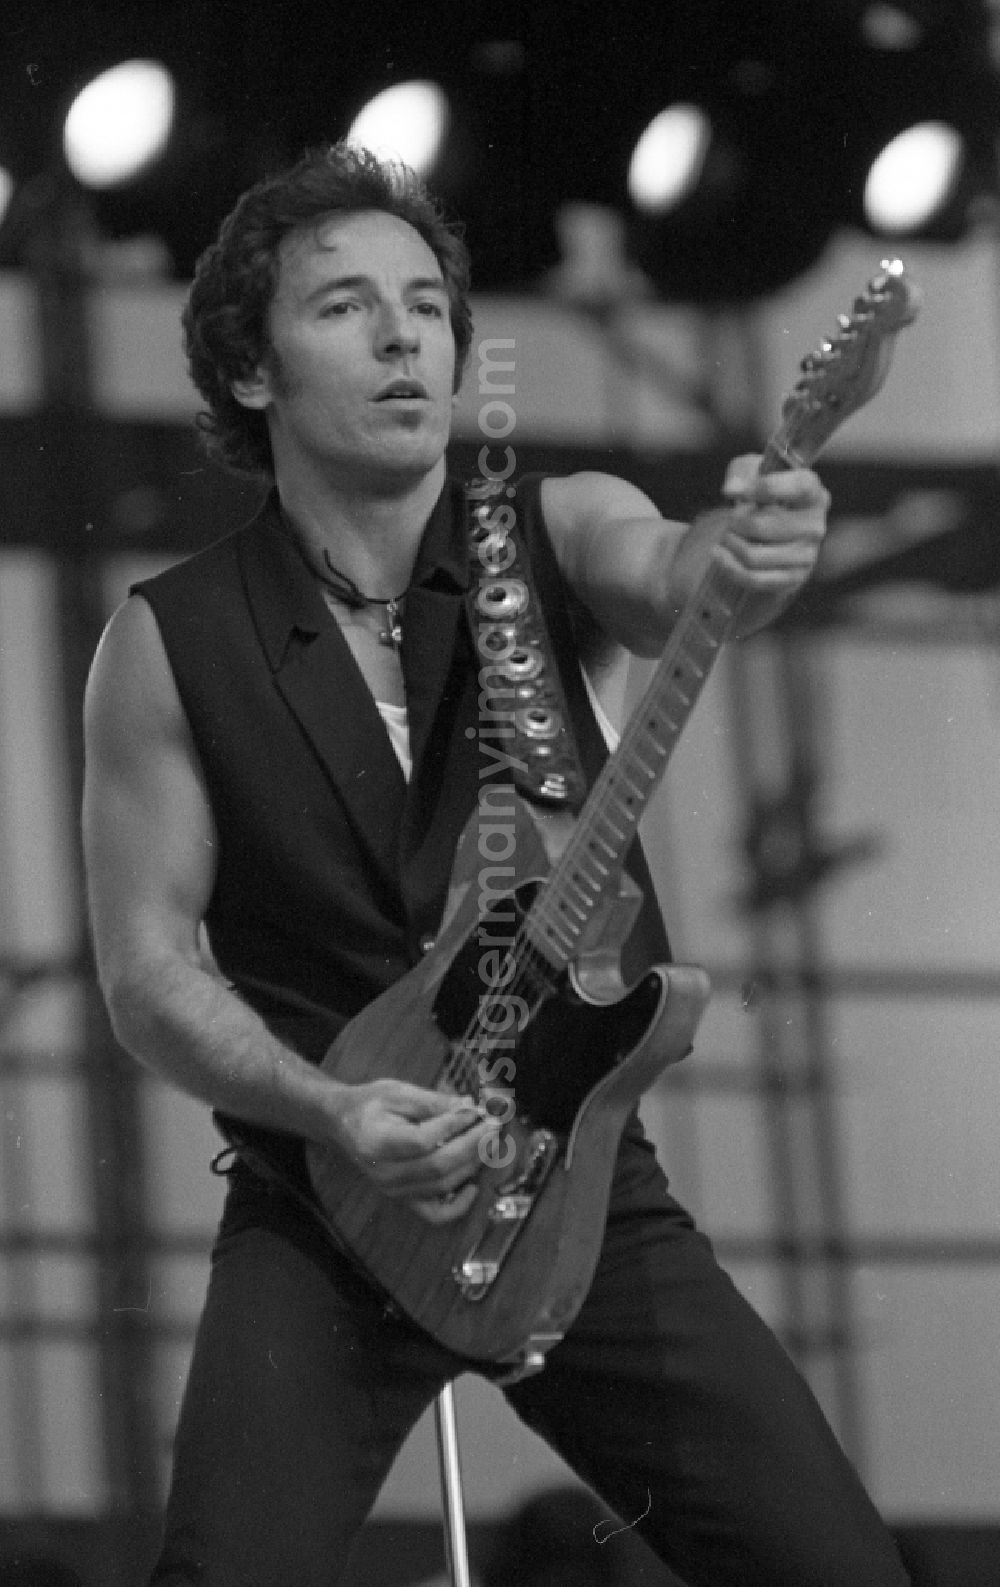 GDR photo archive: Berlin - Portrait shot of the singer and musician Bruce Springsteen in the district Weissensee in Berlin Eastberlin on the territory of the former GDR, German Democratic Republic